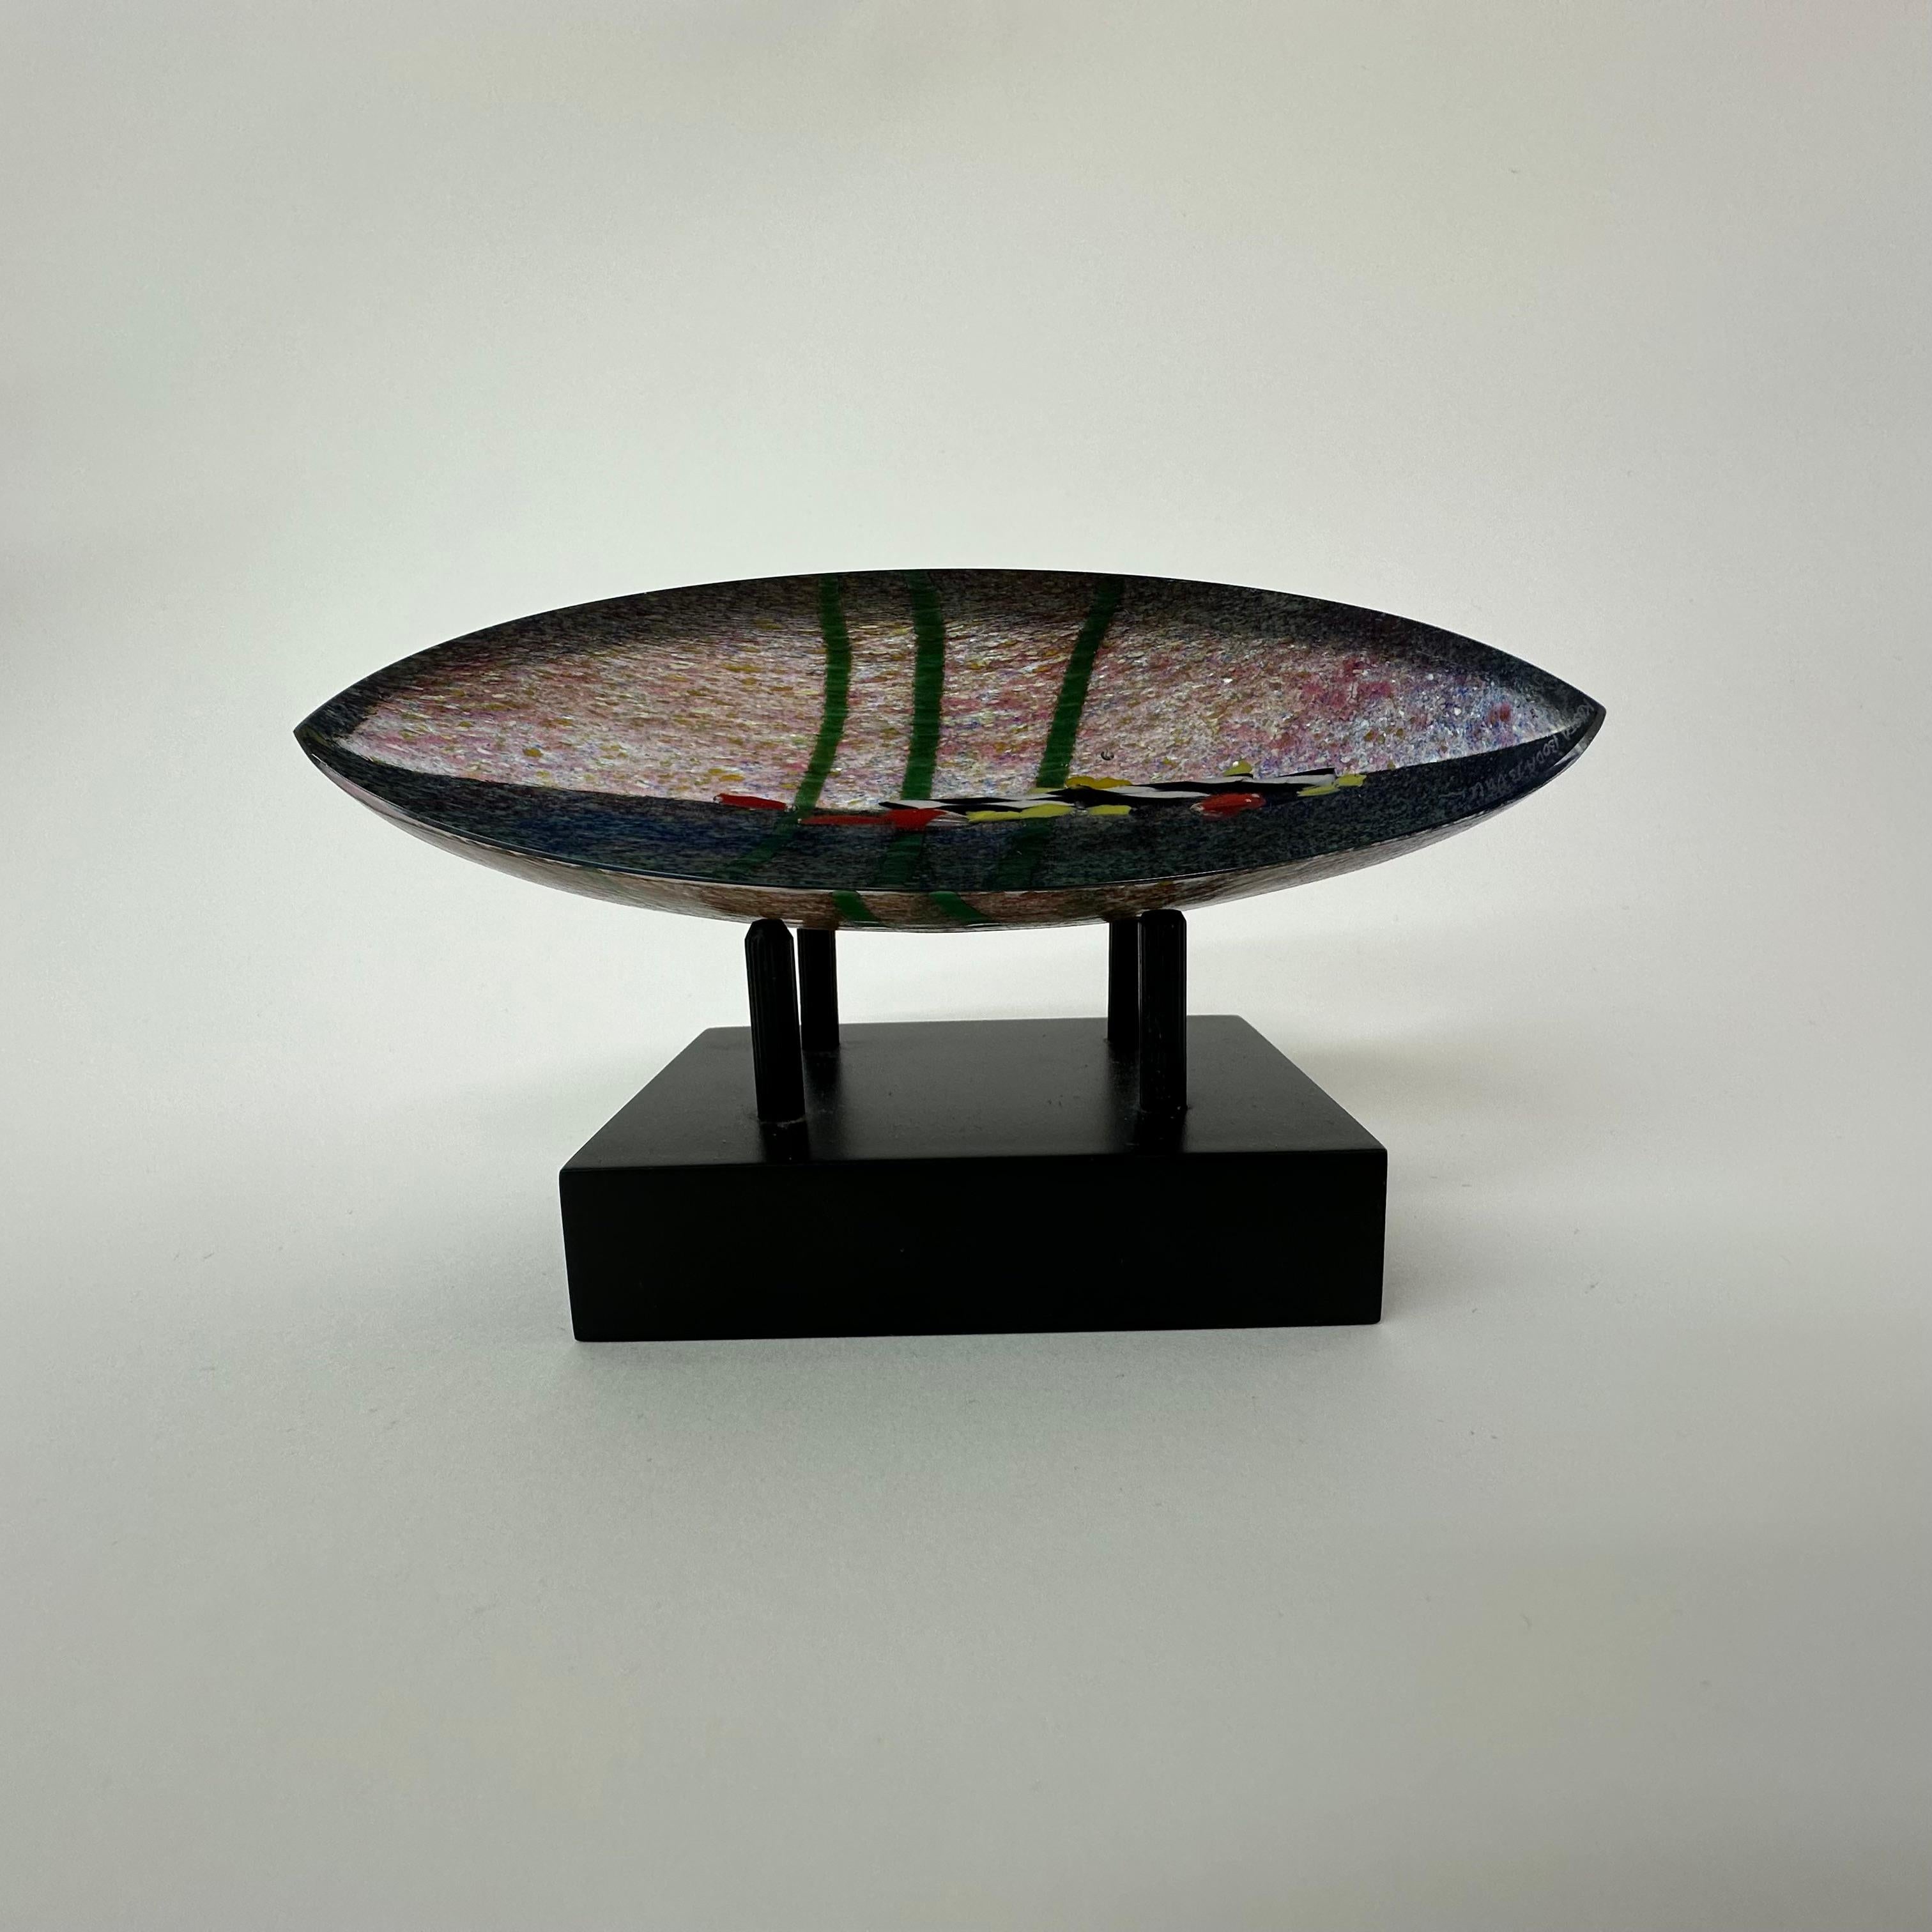 Dimensions: 17.5cm W, 5,5cmD, 4cm H With stand: 8cm H
Signed by artist